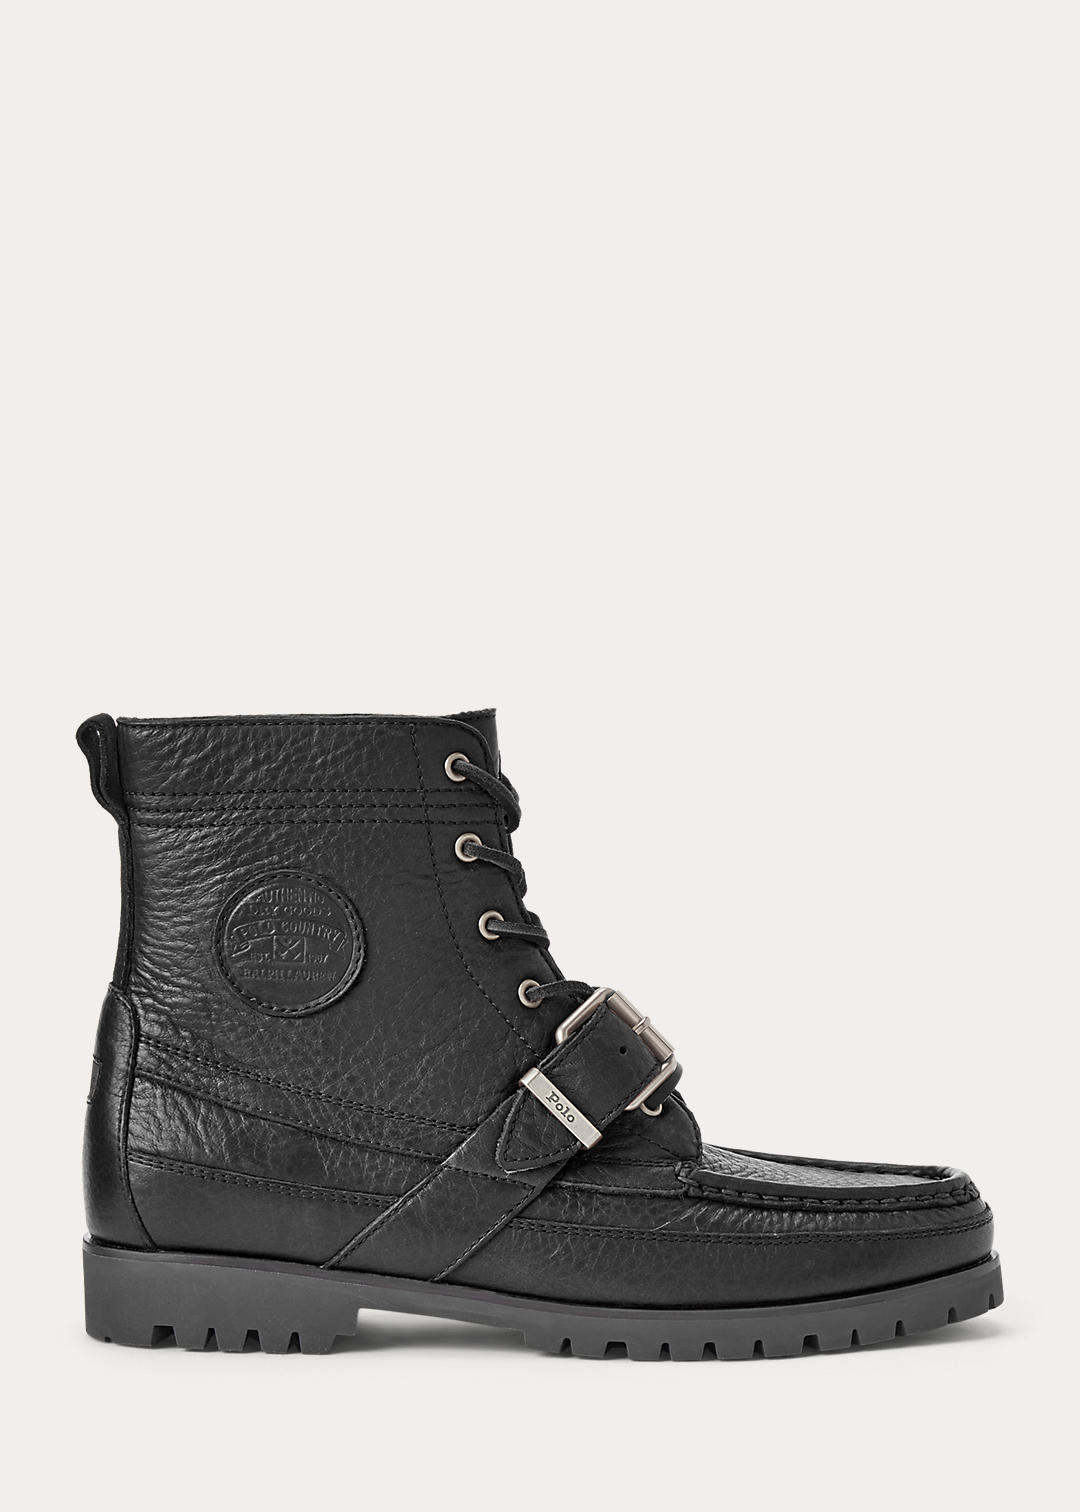 Ranger Tumbled Leather Boot